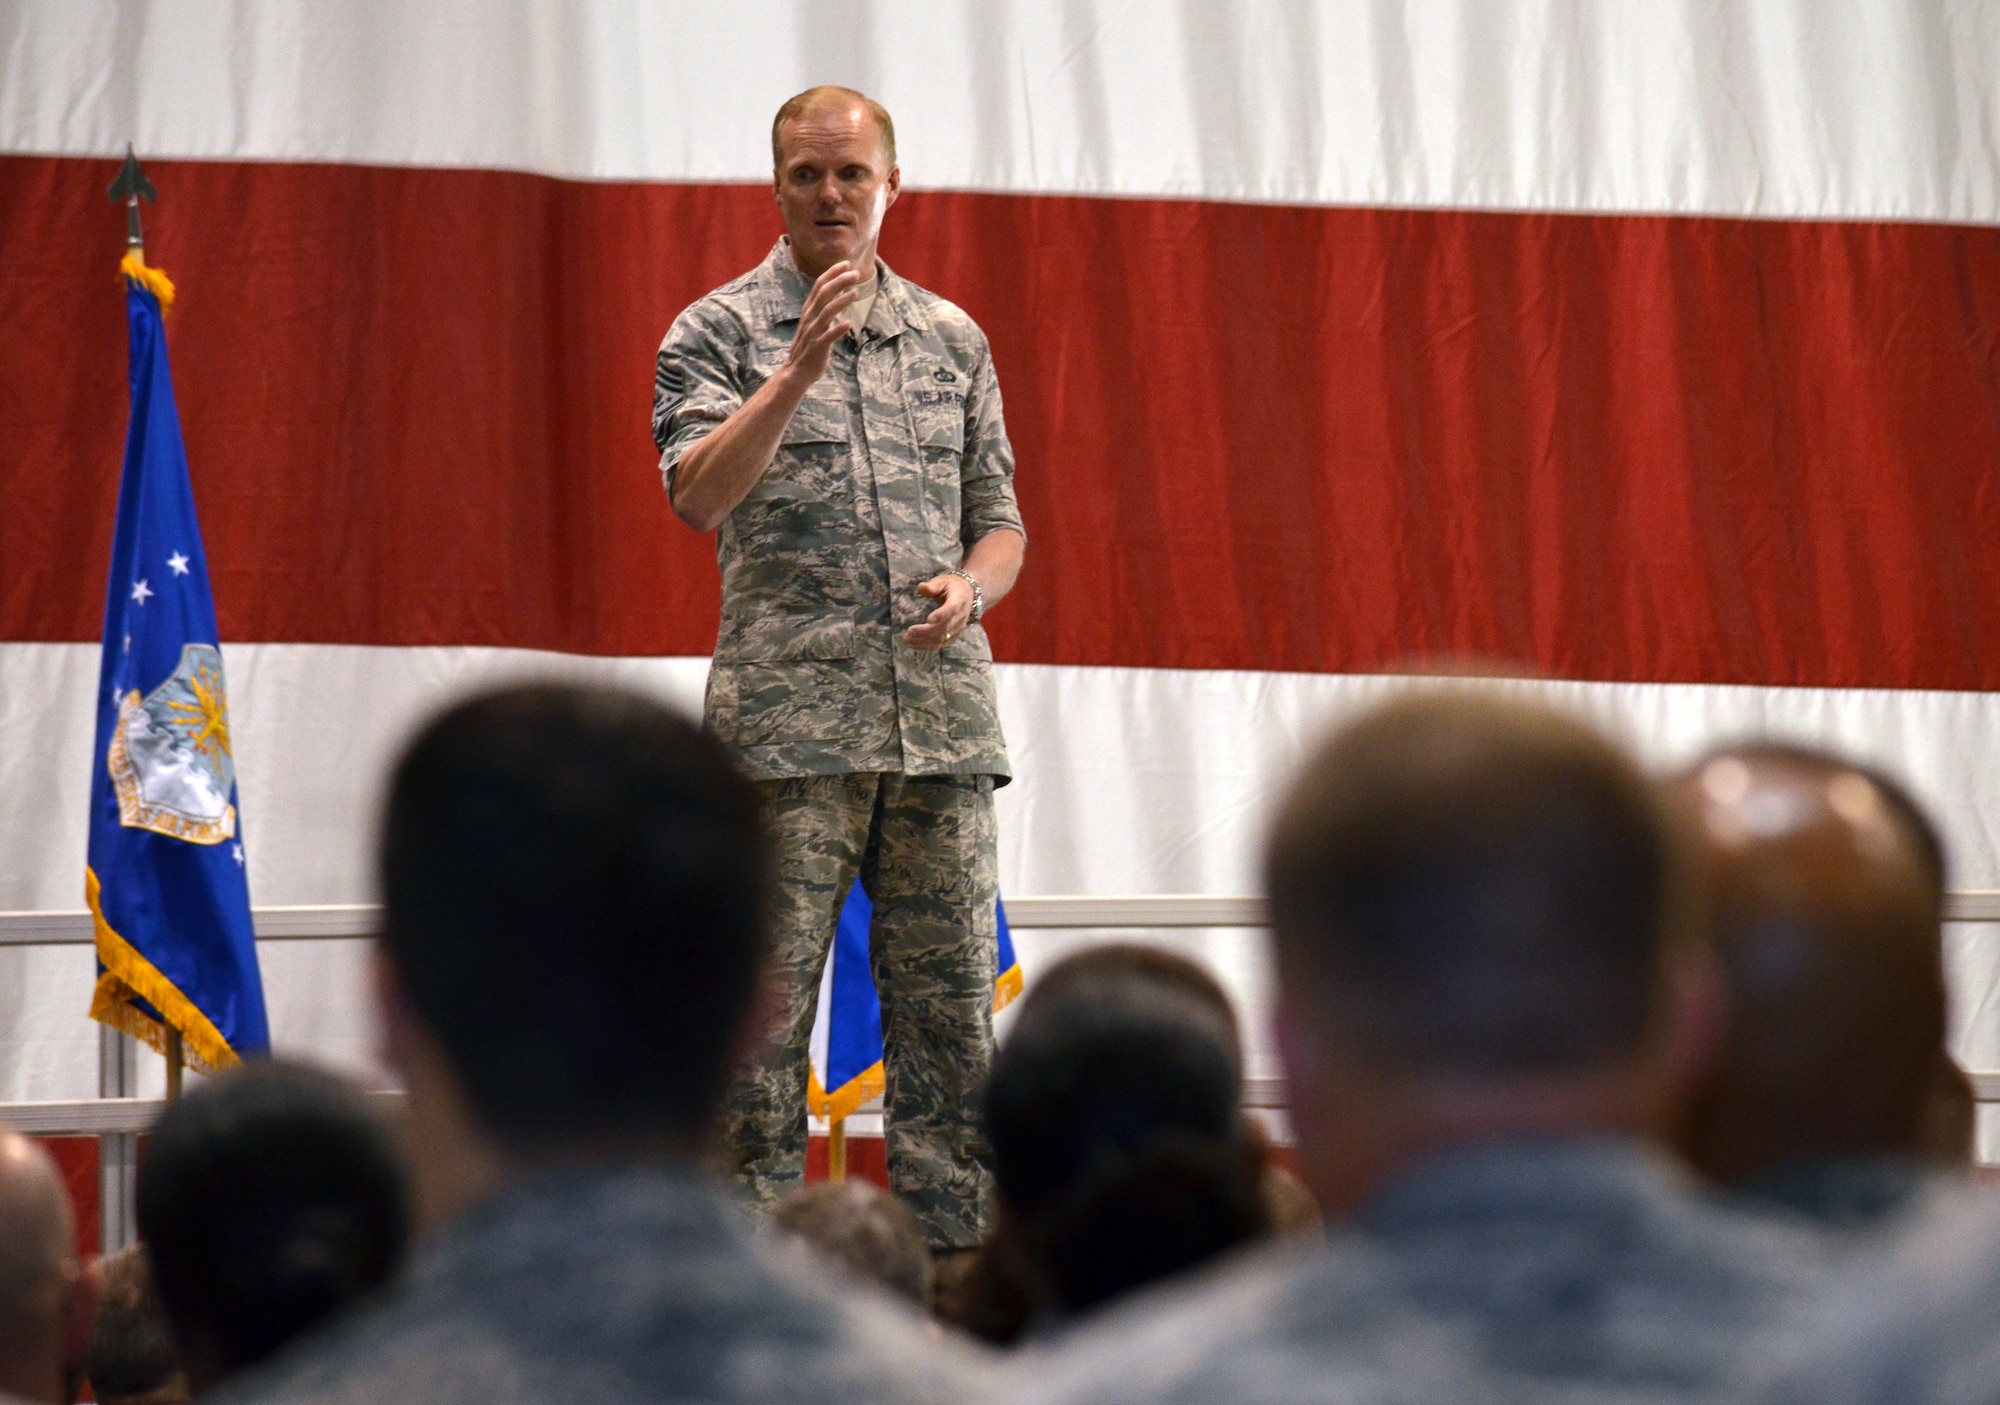 Chief Master Sgt. of the Air Force James A. Cody addresses Airmen during an enlisted call June 24, 2014, on Robins Air Force Base, Ga. During his visit, Cody met with more than 2,000 Reserve, Guard and active-duty Airmen and spoke about key issues in the Air Force. (U.S. Air Force photo/Staff Sgt. Kelly Goonan)